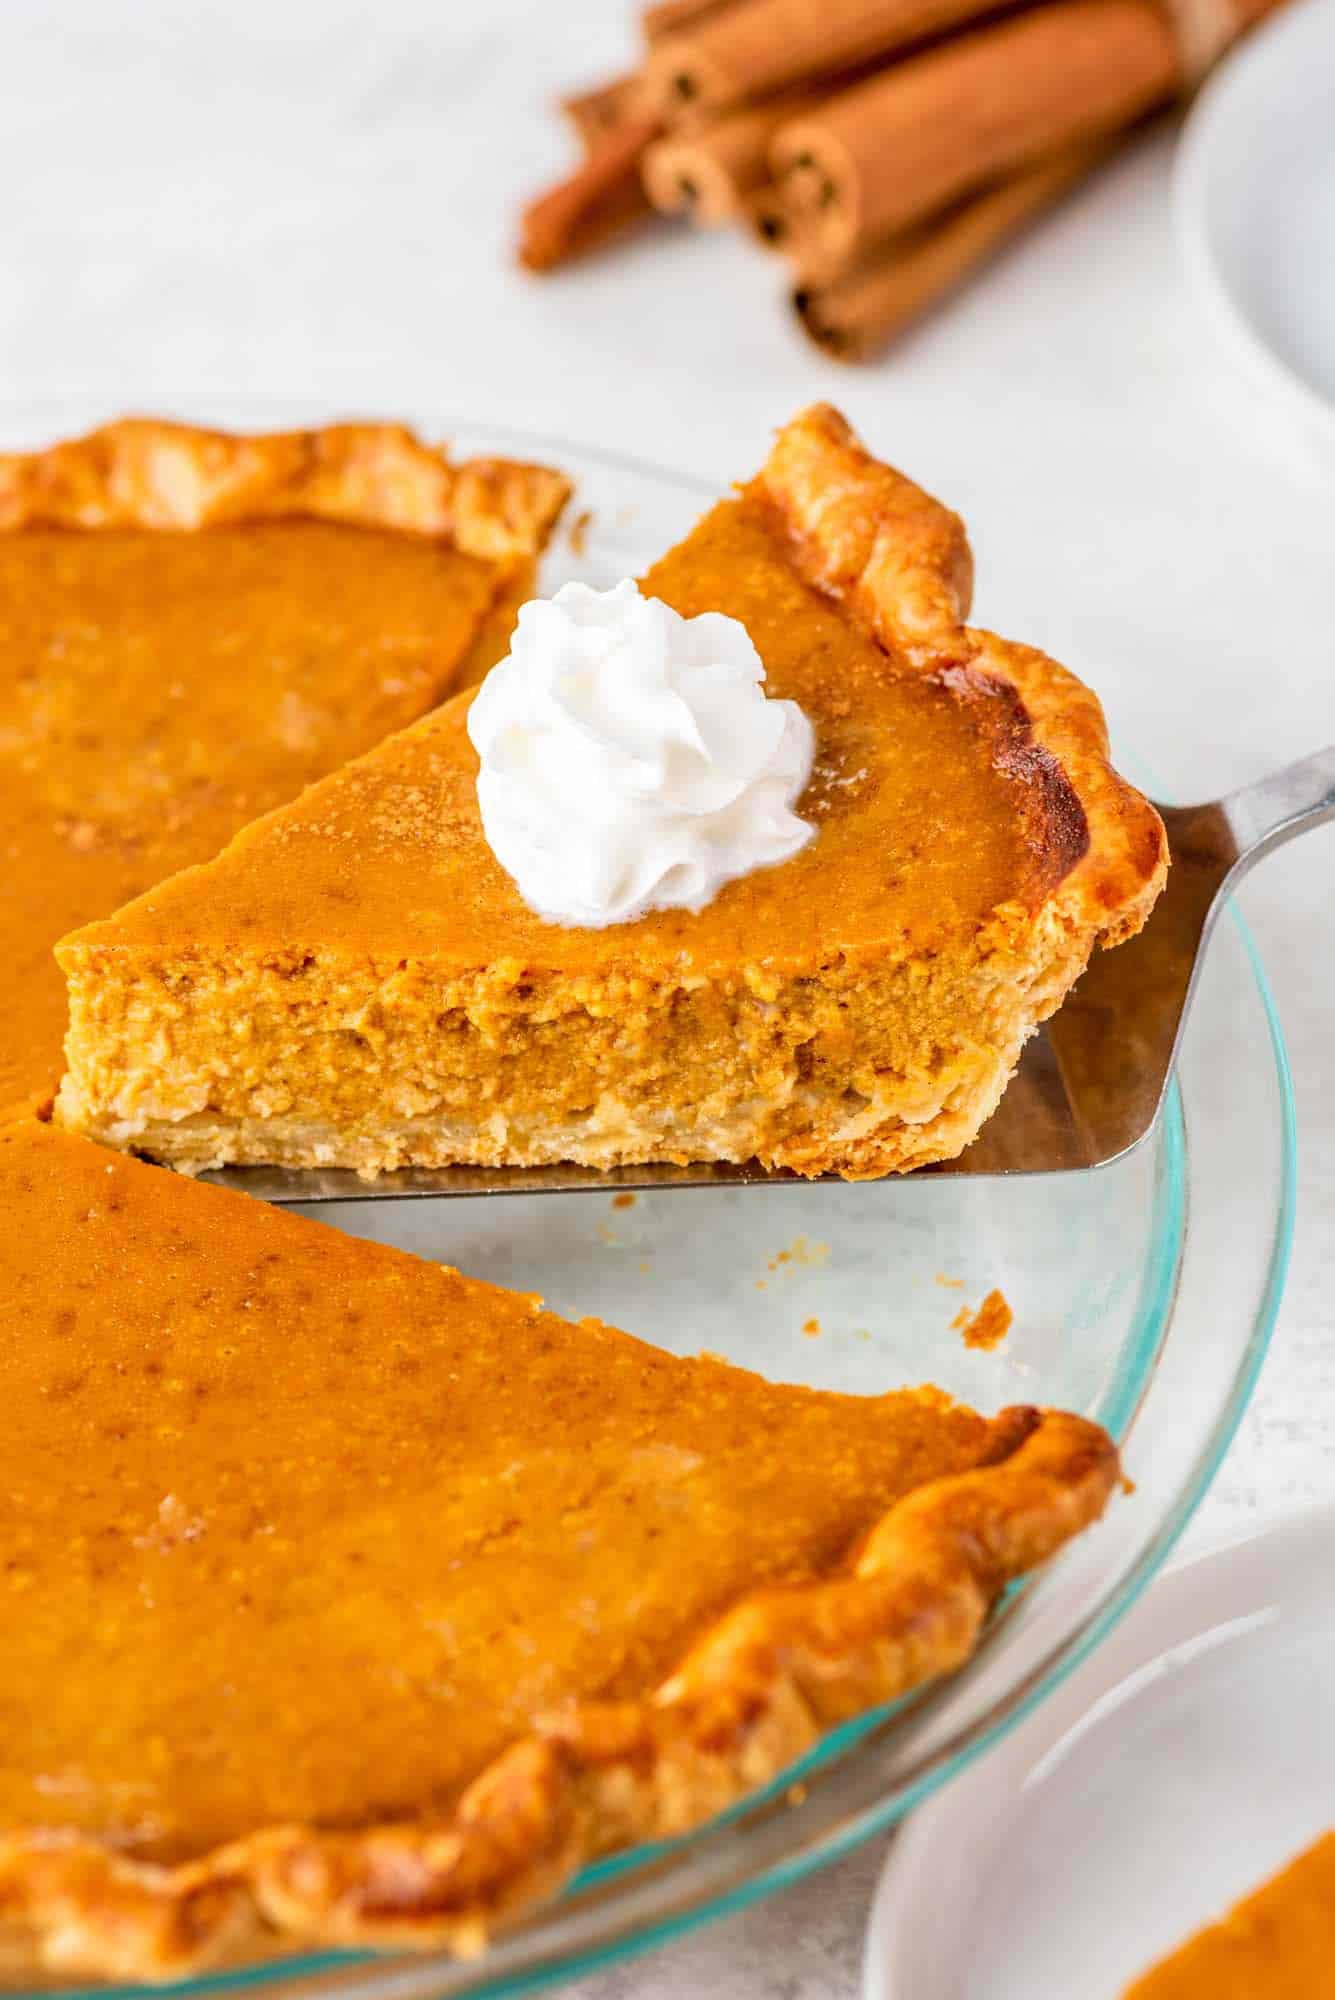 Taking a slice of pumpkin pie, topped with whipped cream